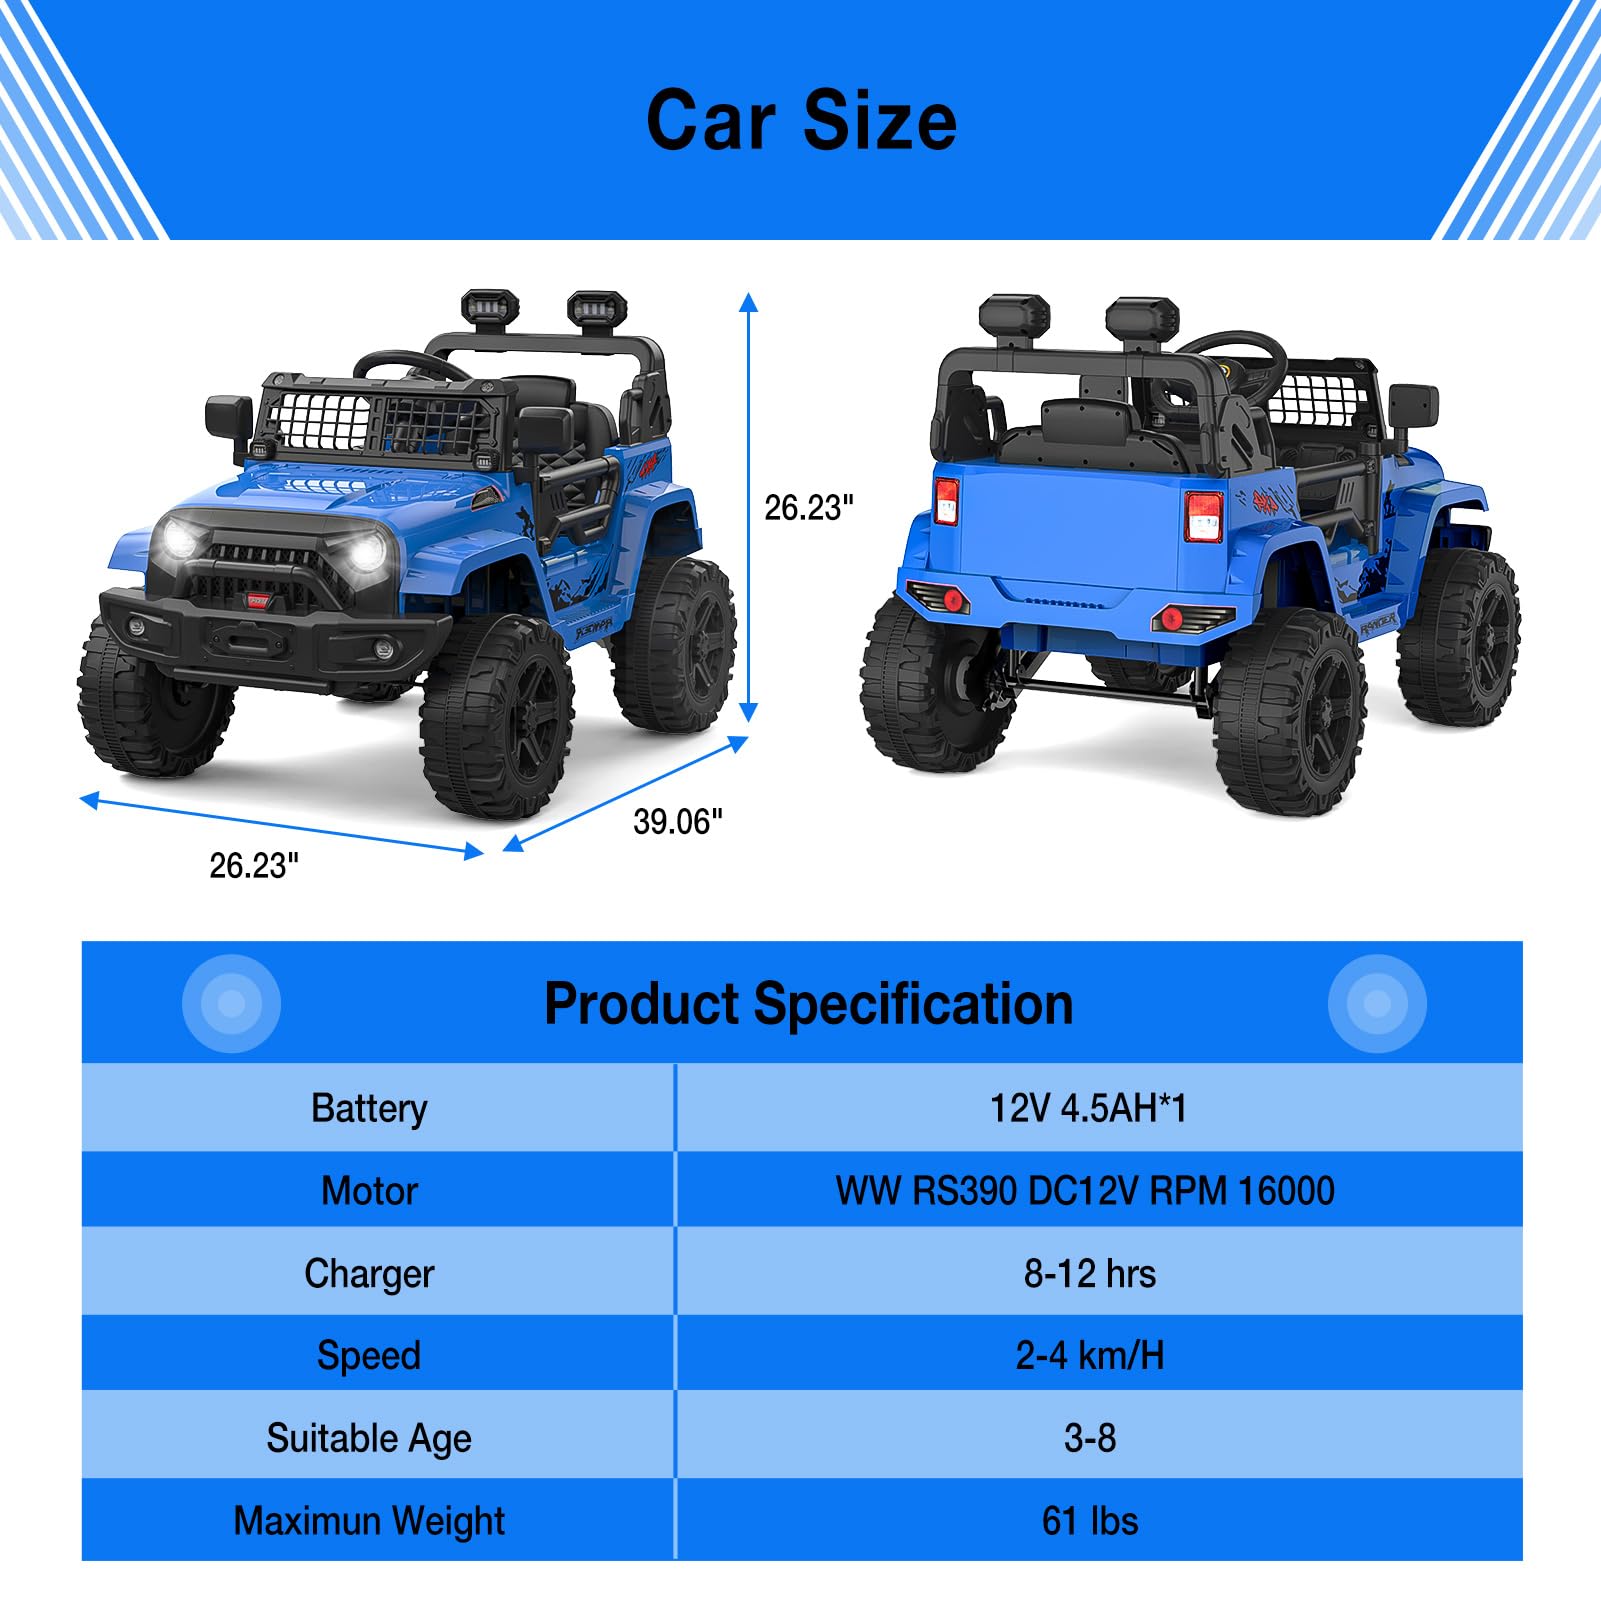 Ride on Truck Car 12V Kids Electric Mini Jeep with Remote Control Spring Suspension, LED Lights, Bluetooth, 2 Speeds (Blue) - image 3 of 8